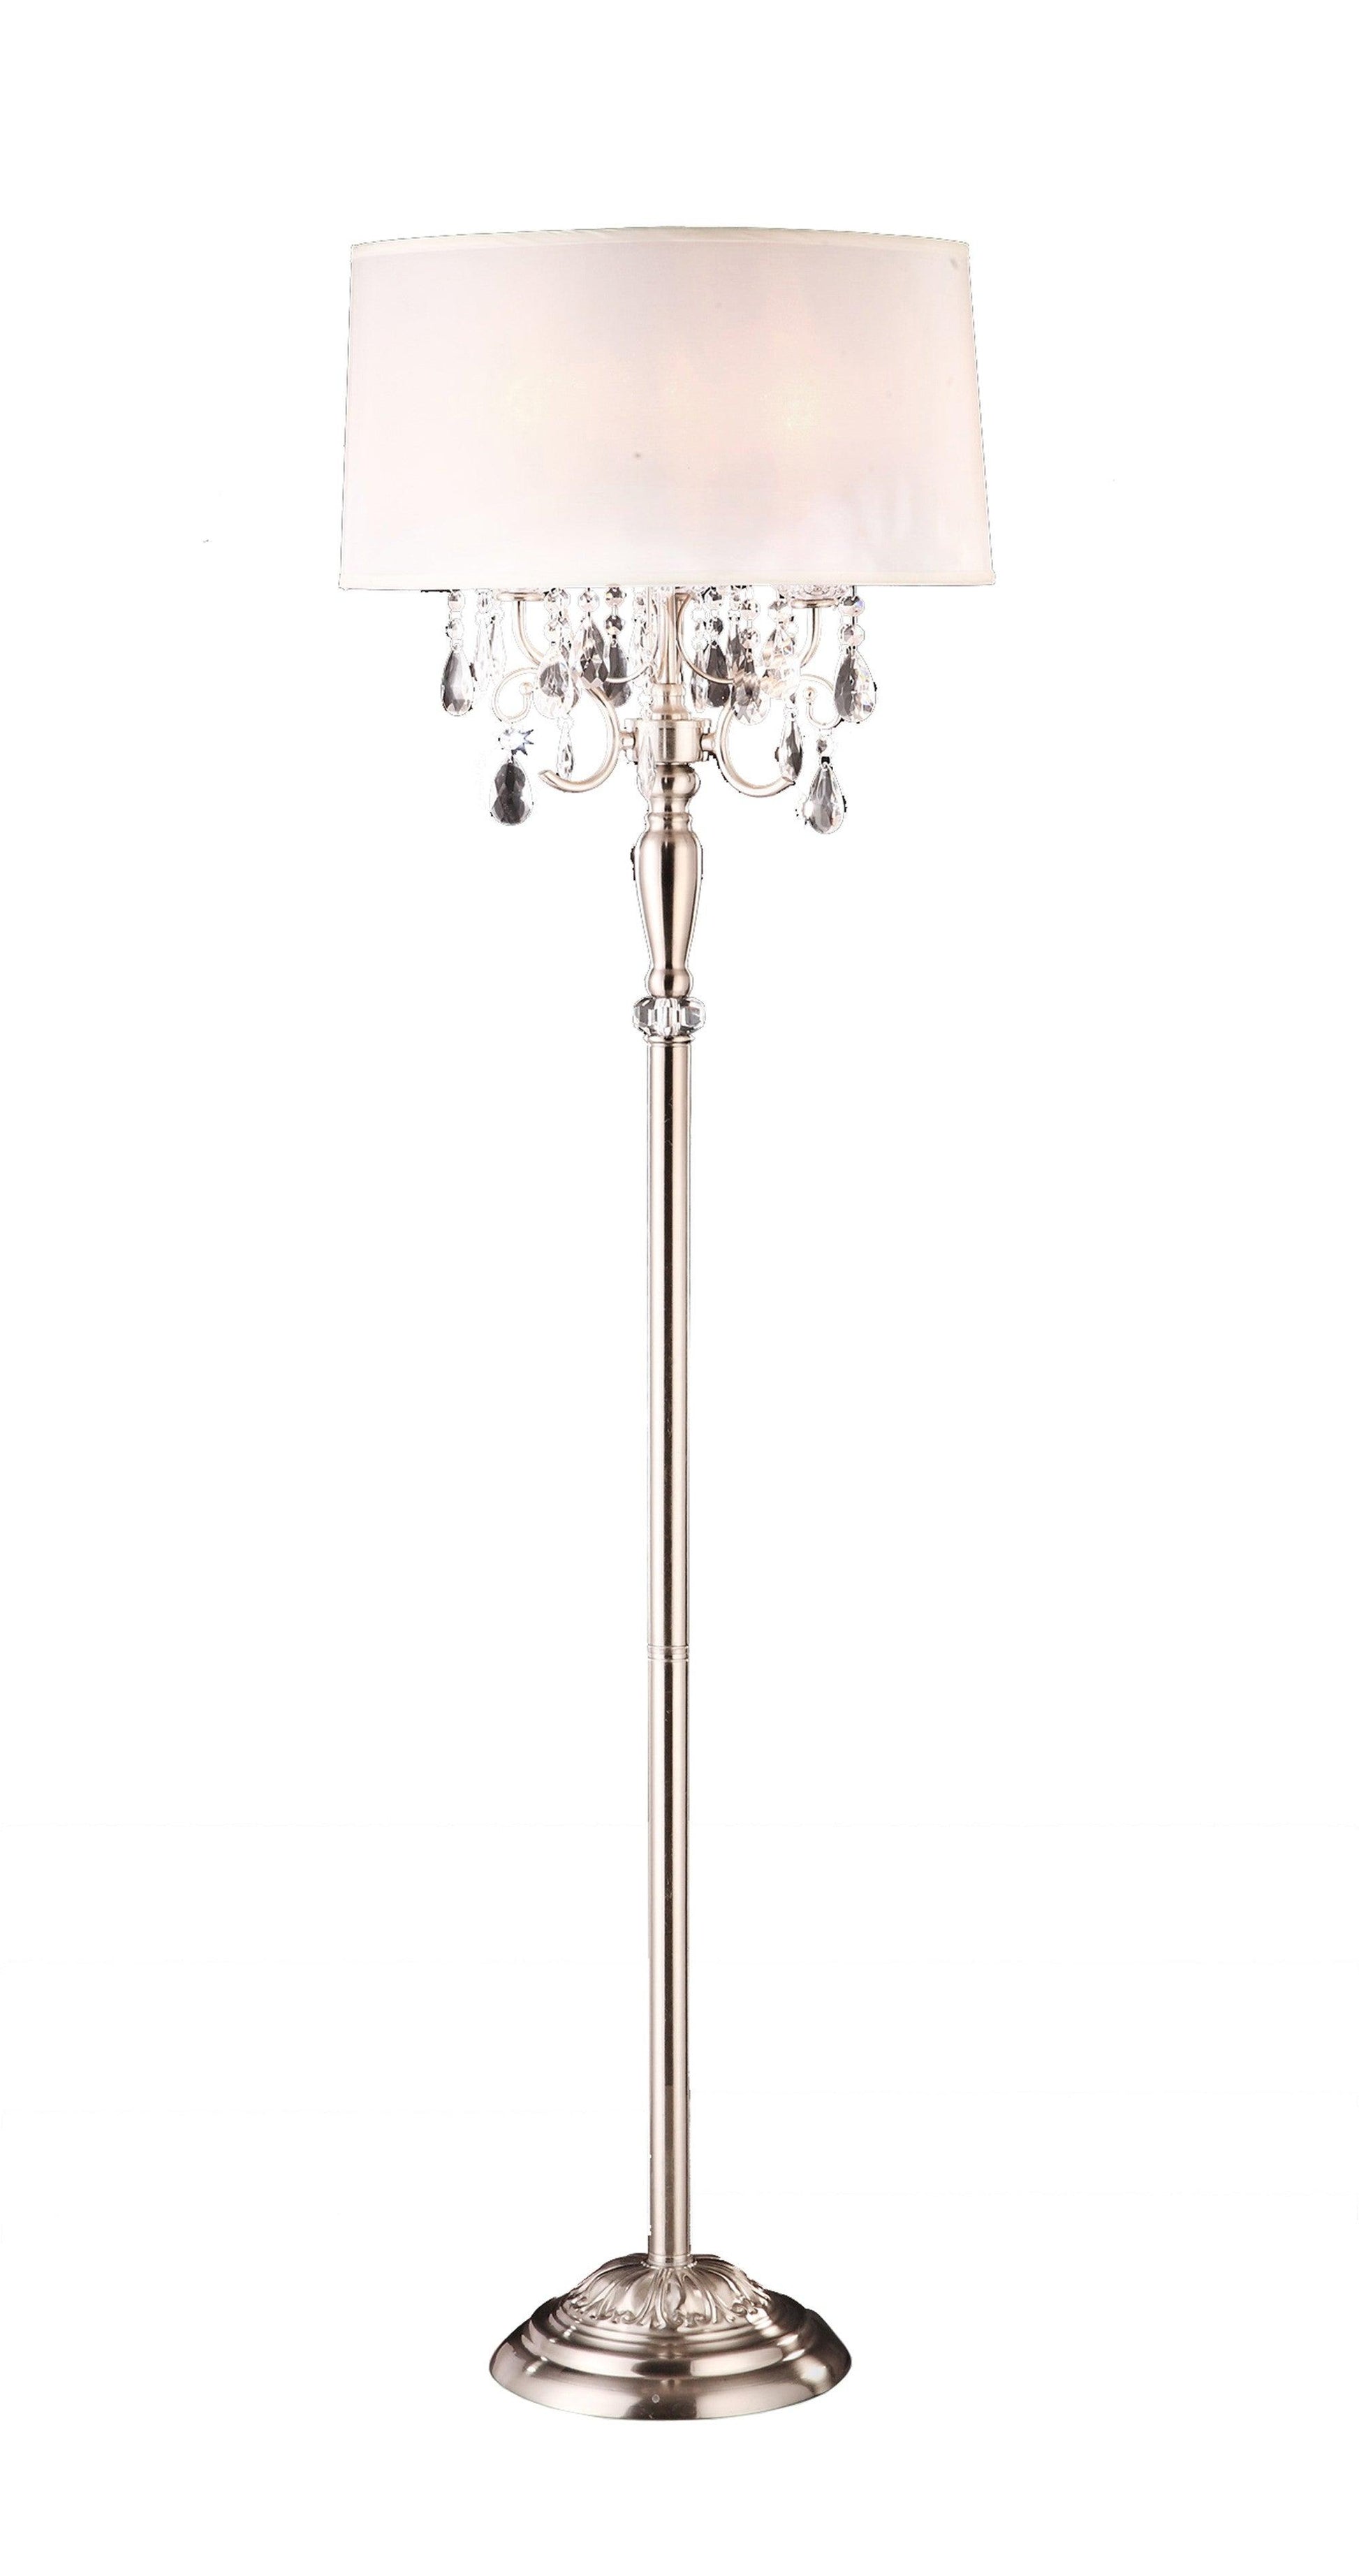 Glamorous Silver and Faux Crystal Candleabra Metal Floor Lamp - AFS